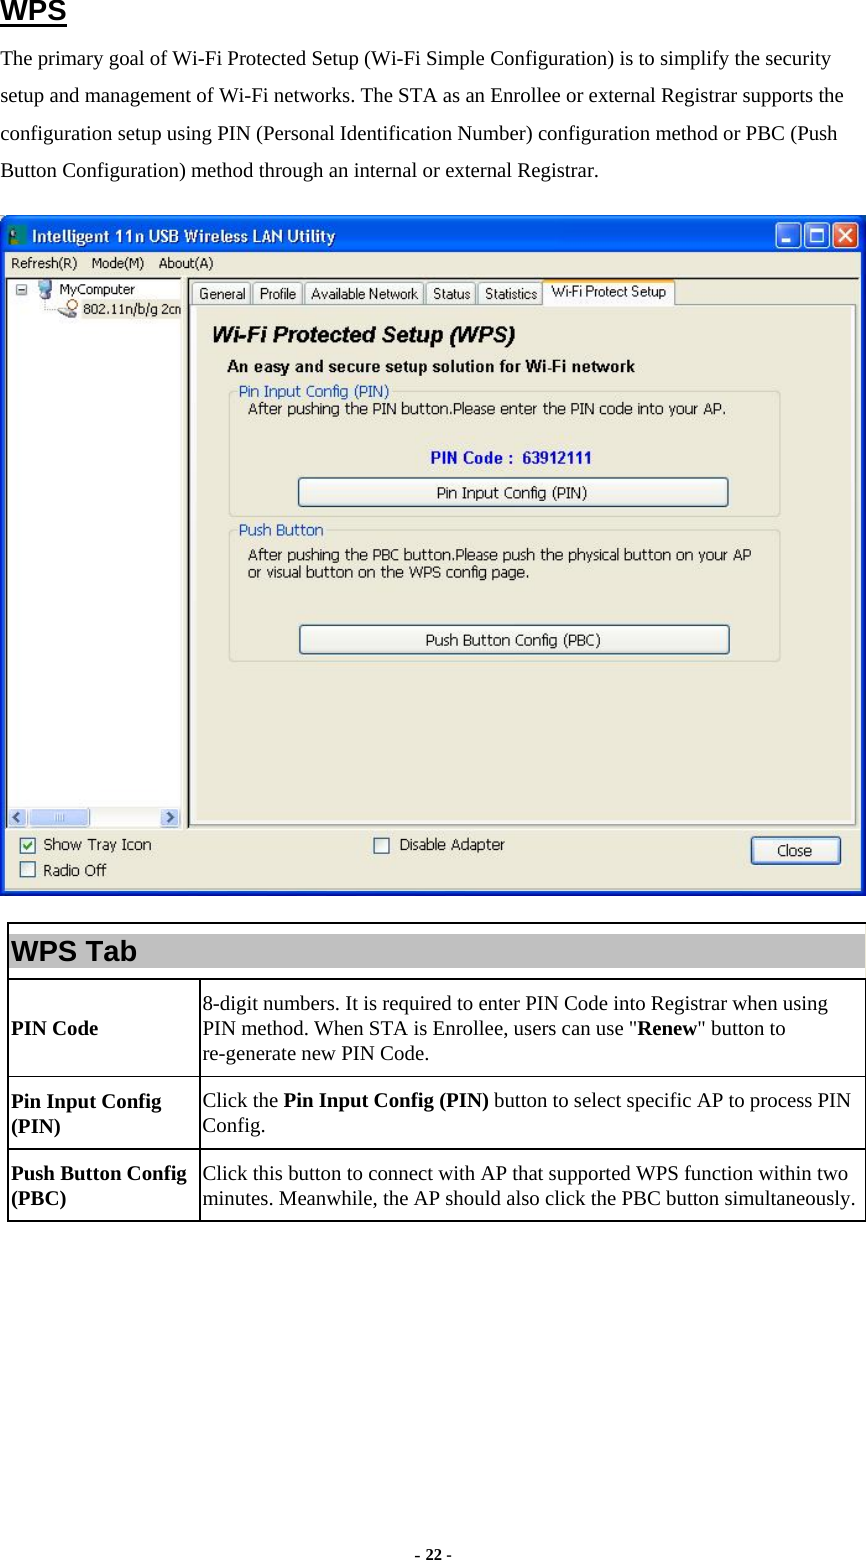  - 22 - WPS The primary goal of Wi-Fi Protected Setup (Wi-Fi Simple Configuration) is to simplify the security setup and management of Wi-Fi networks. The STA as an Enrollee or external Registrar supports the configuration setup using PIN (Personal Identification Number) configuration method or PBC (Push Button Configuration) method through an internal or external Registrar.  WPS Tab PIN Code  8-digit numbers. It is required to enter PIN Code into Registrar when using PIN method. When STA is Enrollee, users can use &quot;Renew&quot; button to re-generate new PIN Code. Pin Input Config (PIN)  Click the Pin Input Config (PIN) button to select specific AP to process PIN Config. Push Button Config (PBC)  Click this button to connect with AP that supported WPS function within two minutes. Meanwhile, the AP should also click the PBC button simultaneously. 